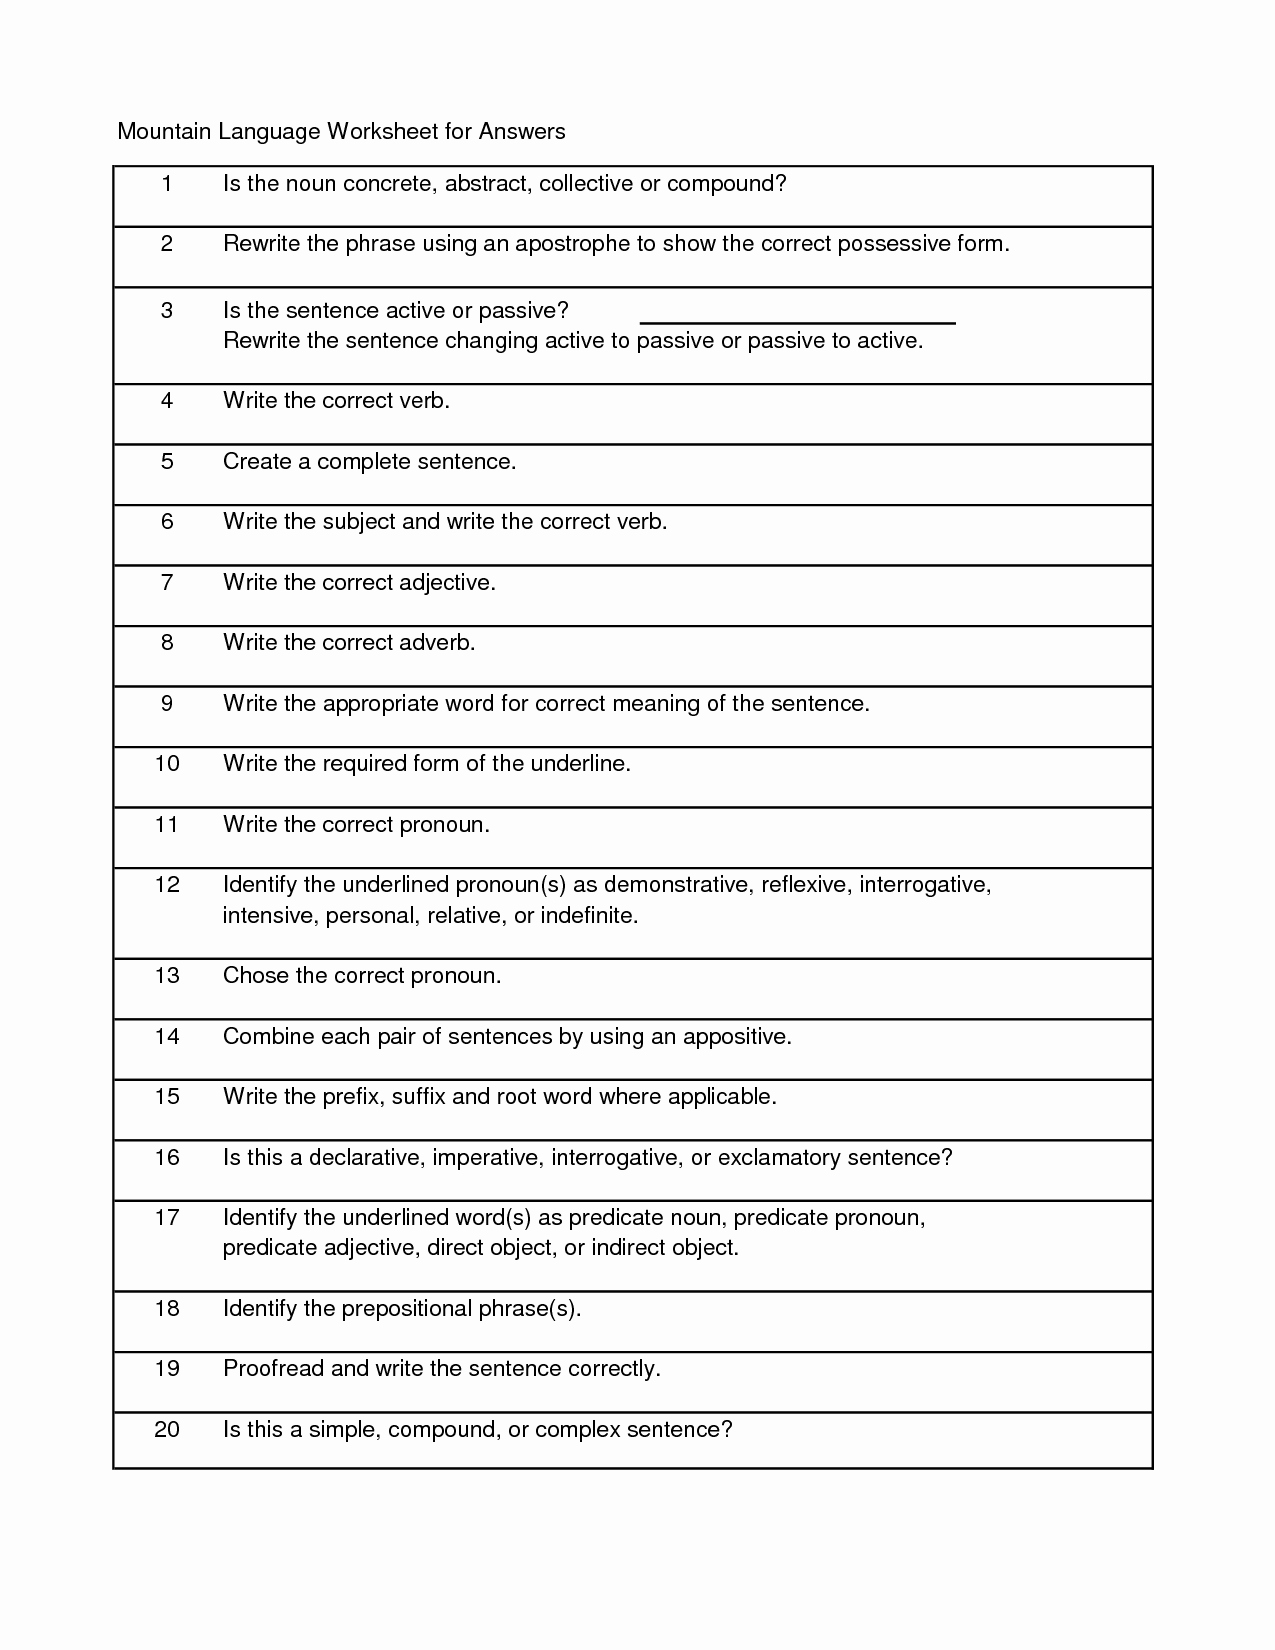 50-compound-sentences-worksheet-with-answers-chessmuseum-template-library